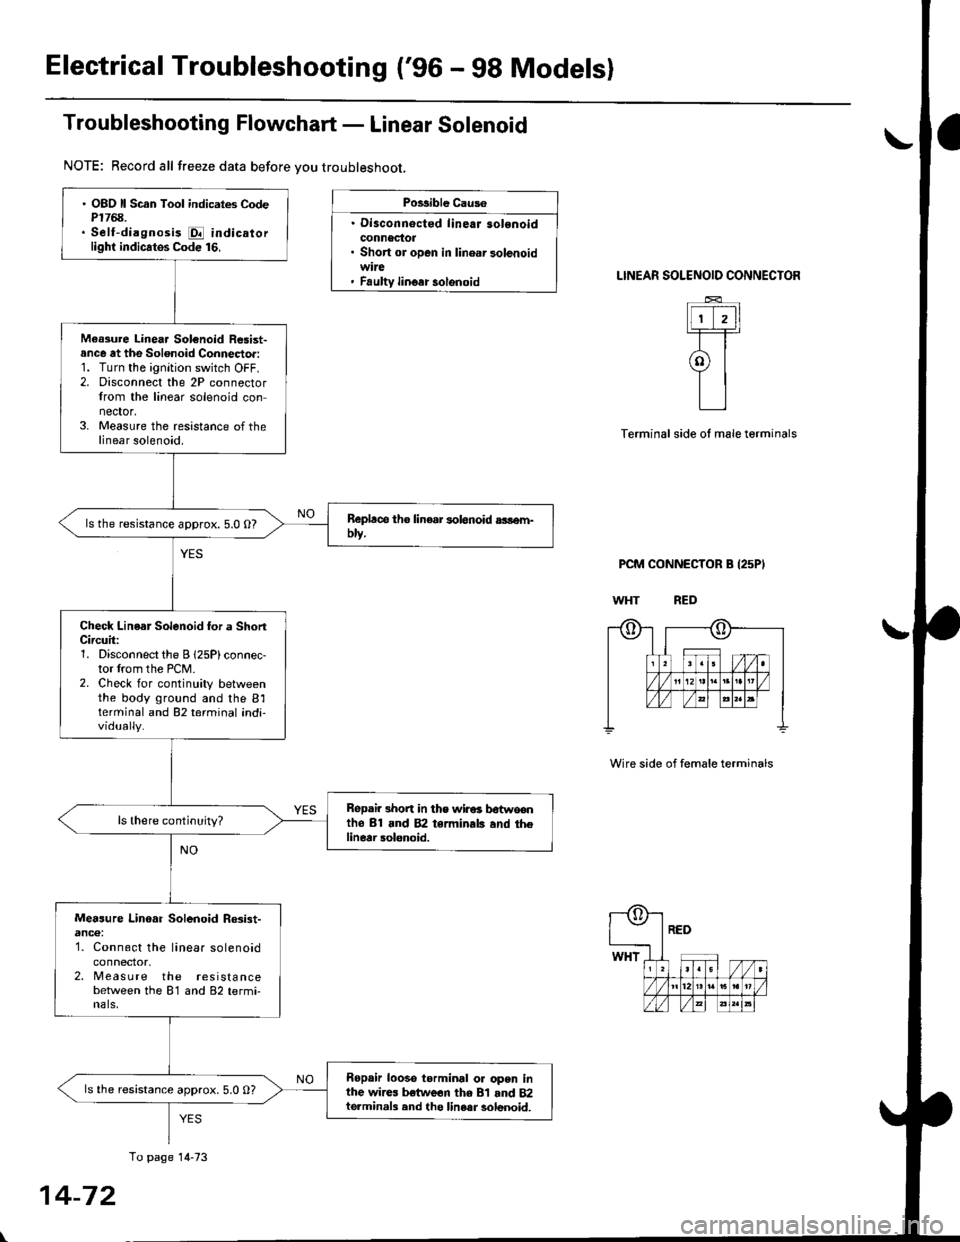 HONDA CIVIC 1998 6.G Owners Manual Electrical Troubleshooting (96 - 98 Modelsl
Troubleshooting Flowchart - Linear Solenoid
NOTE: Record all freeze data before vou troubleshoot,
Po$ible Caus6
. Disconnoctod lineaJ solonoidconnectot. Sh